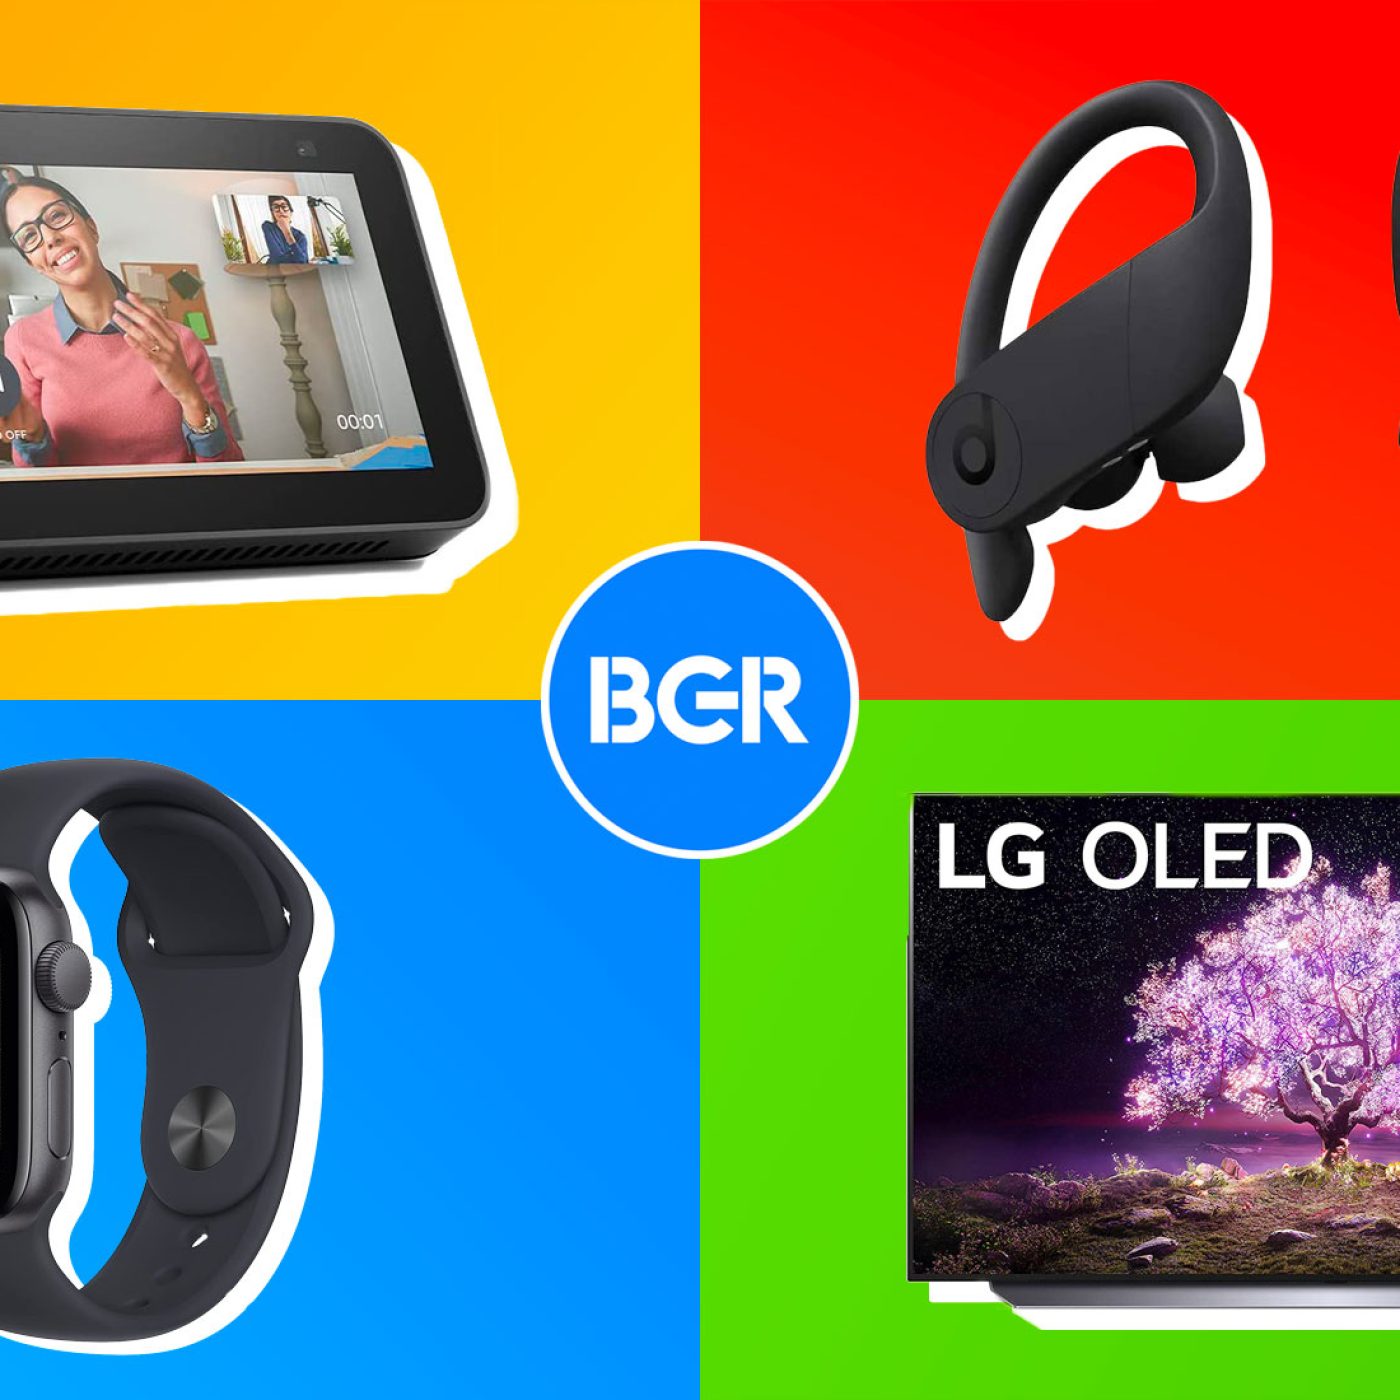 Best Buy July 4th sale: Score deals on TVs, laptops and more today